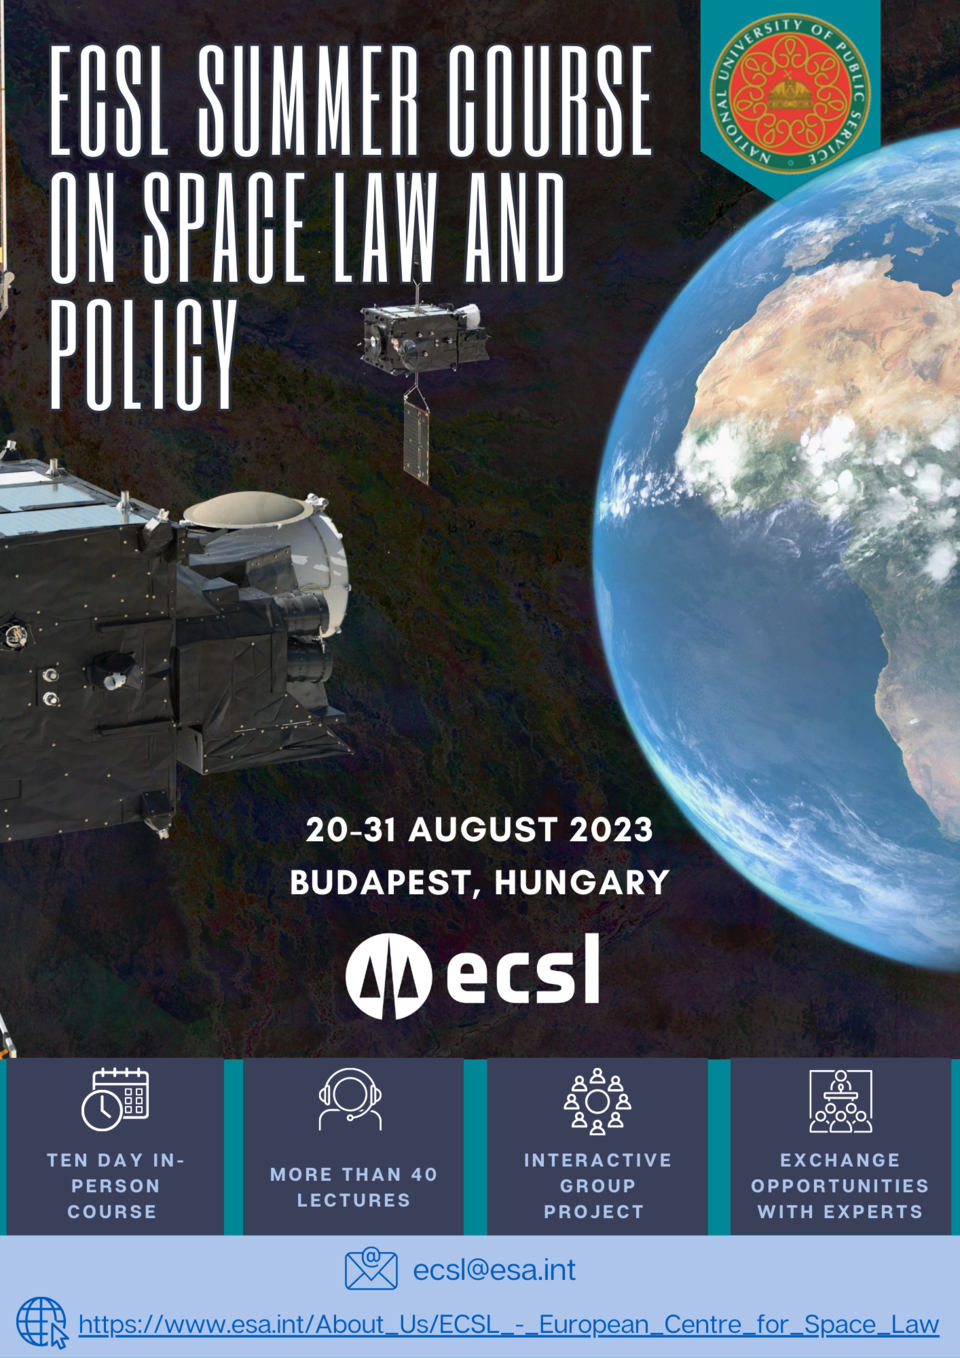 ESA/ECSL Summer Course on Space Law and Policy Flyer